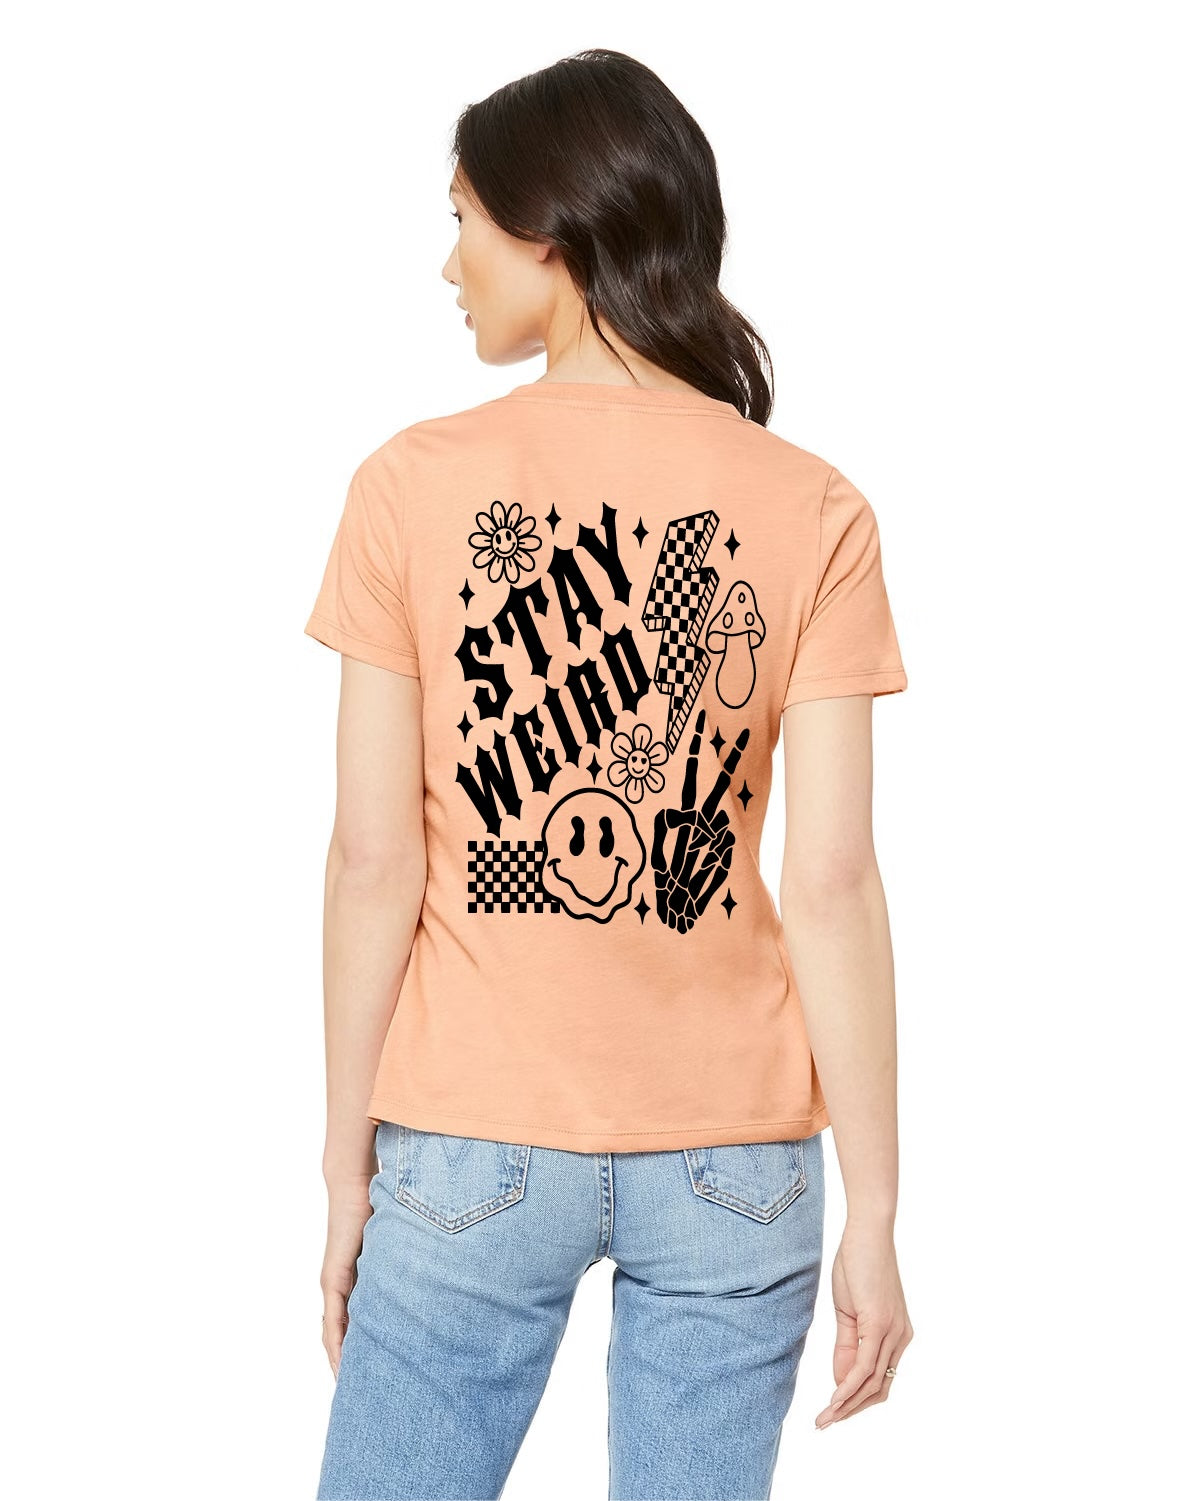 Peach shirt with black design. Checkered design with droopy smile face, lightning bulb, mushroom, flowers and skeleton fingers. Shirt says stay weird. 